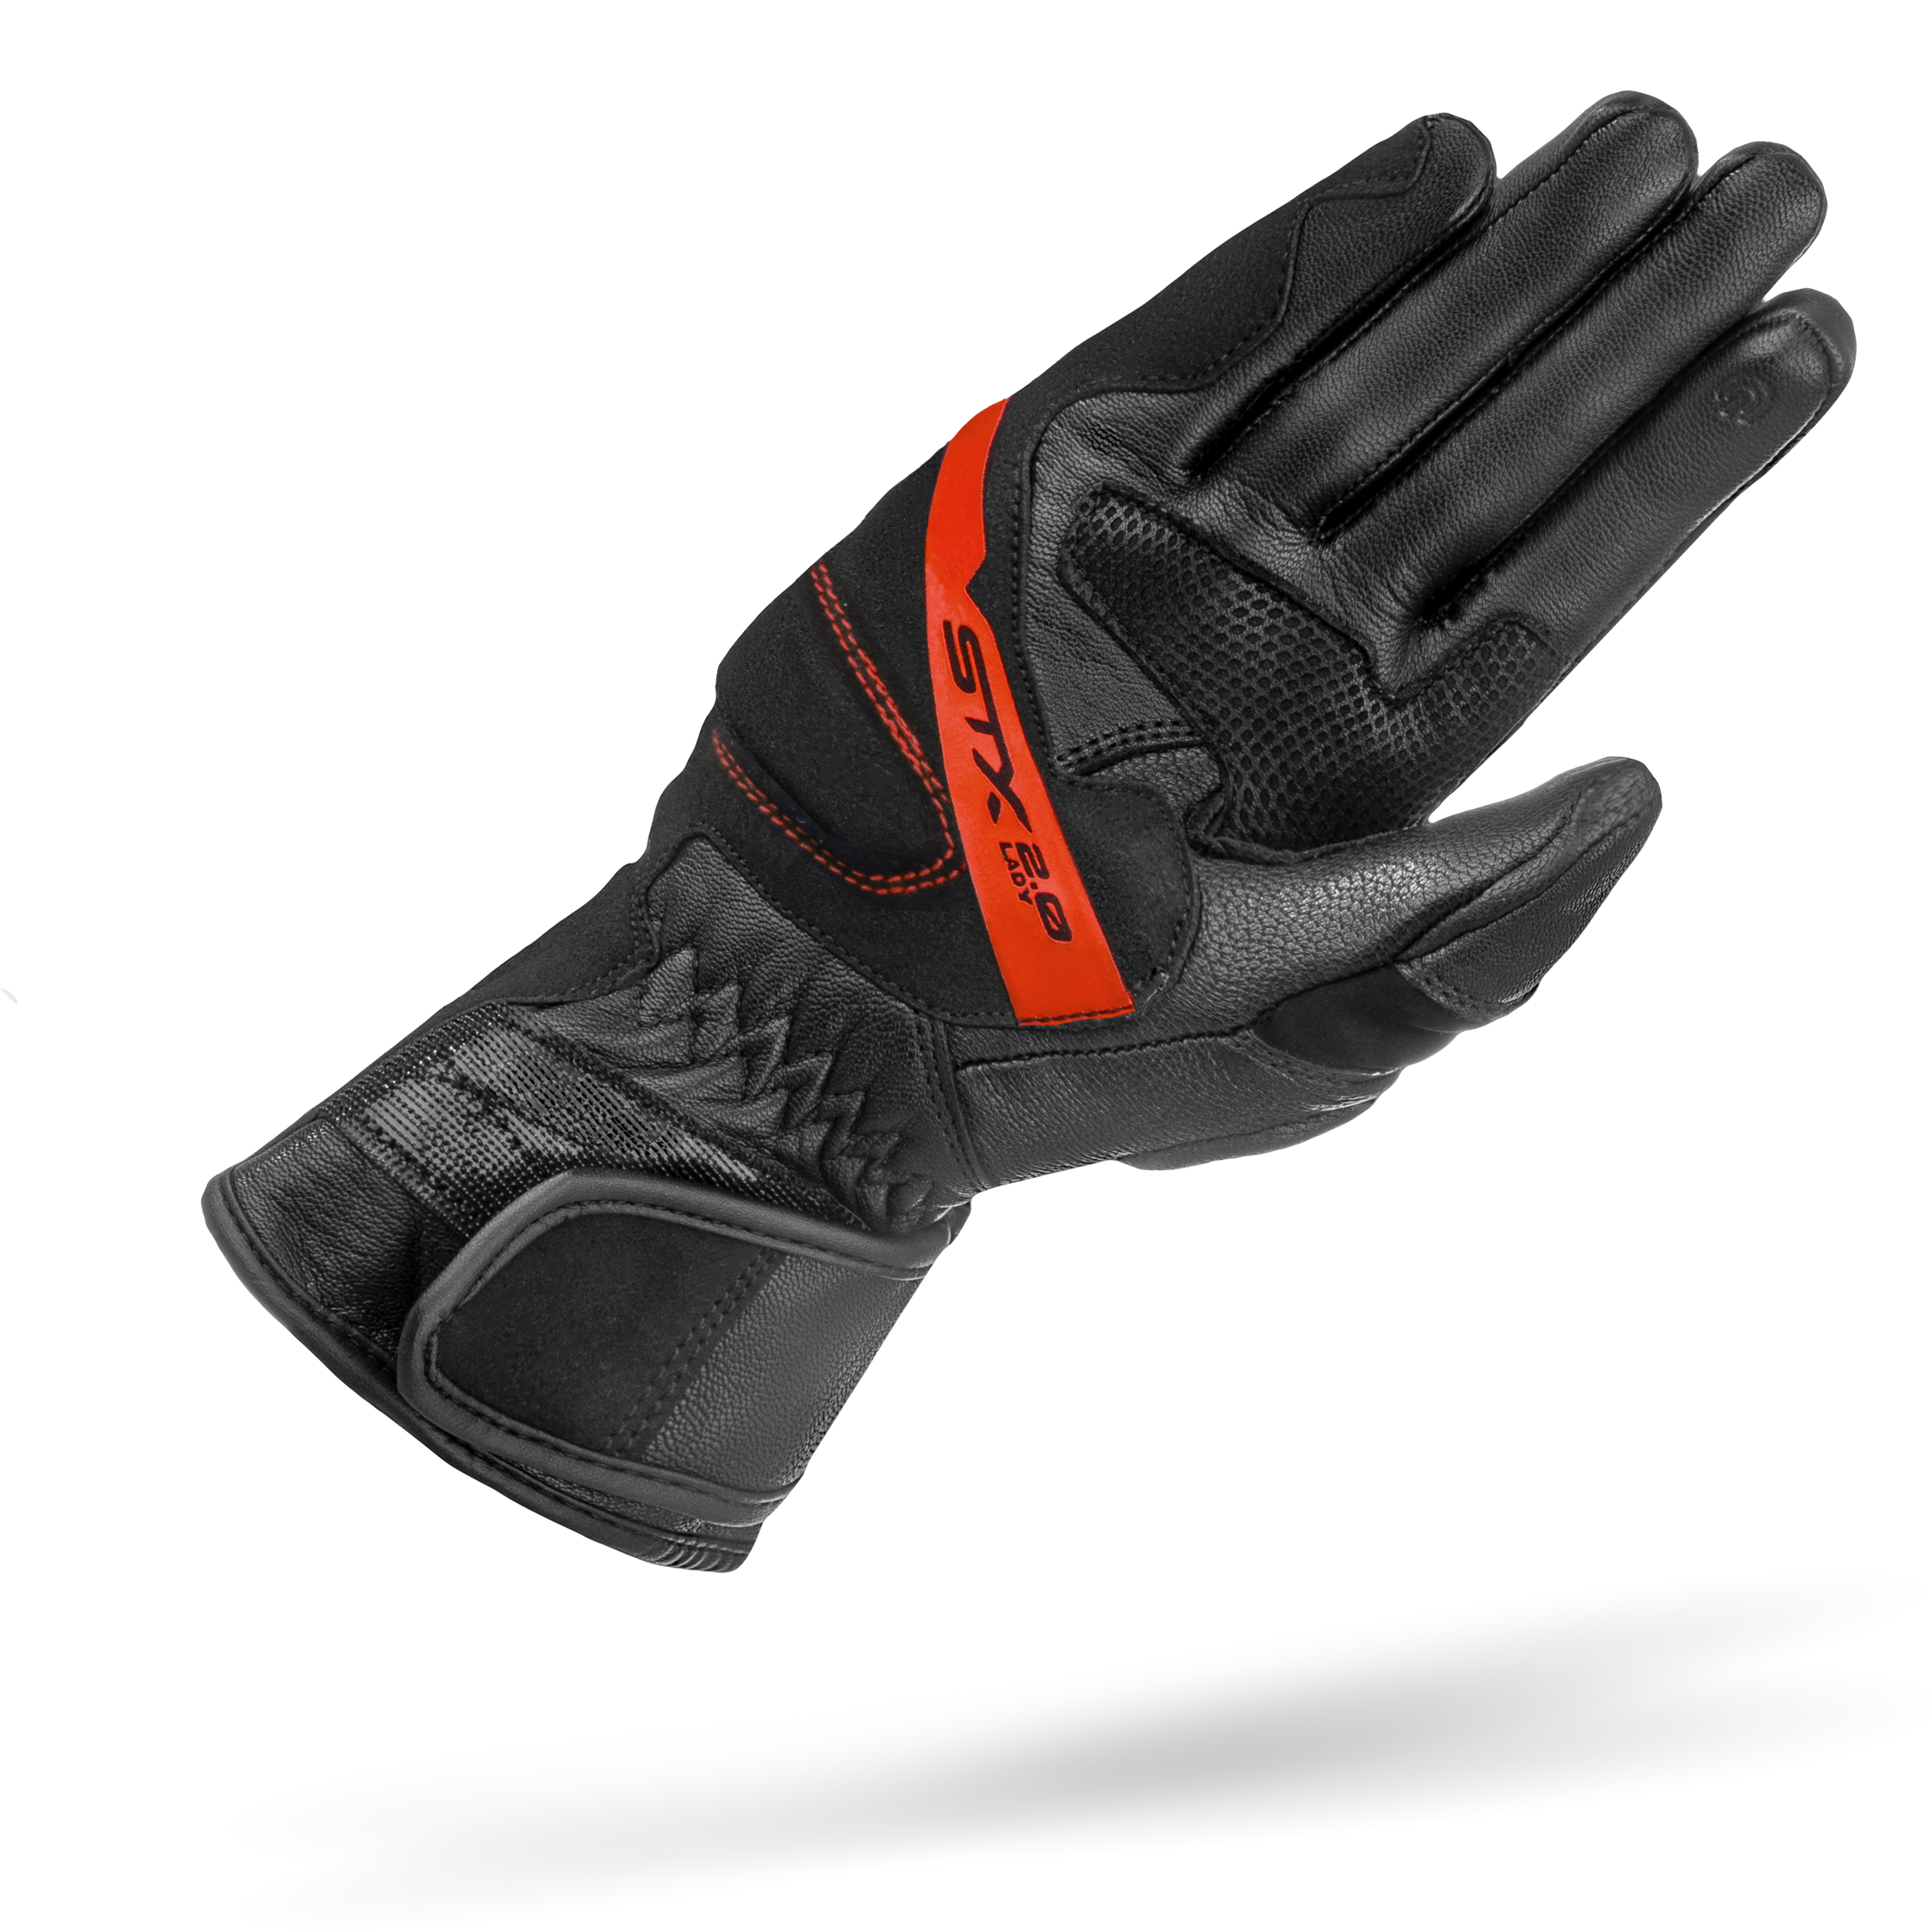 The palm of Black and RED women's leather motorcycle glove STX from SHIMA